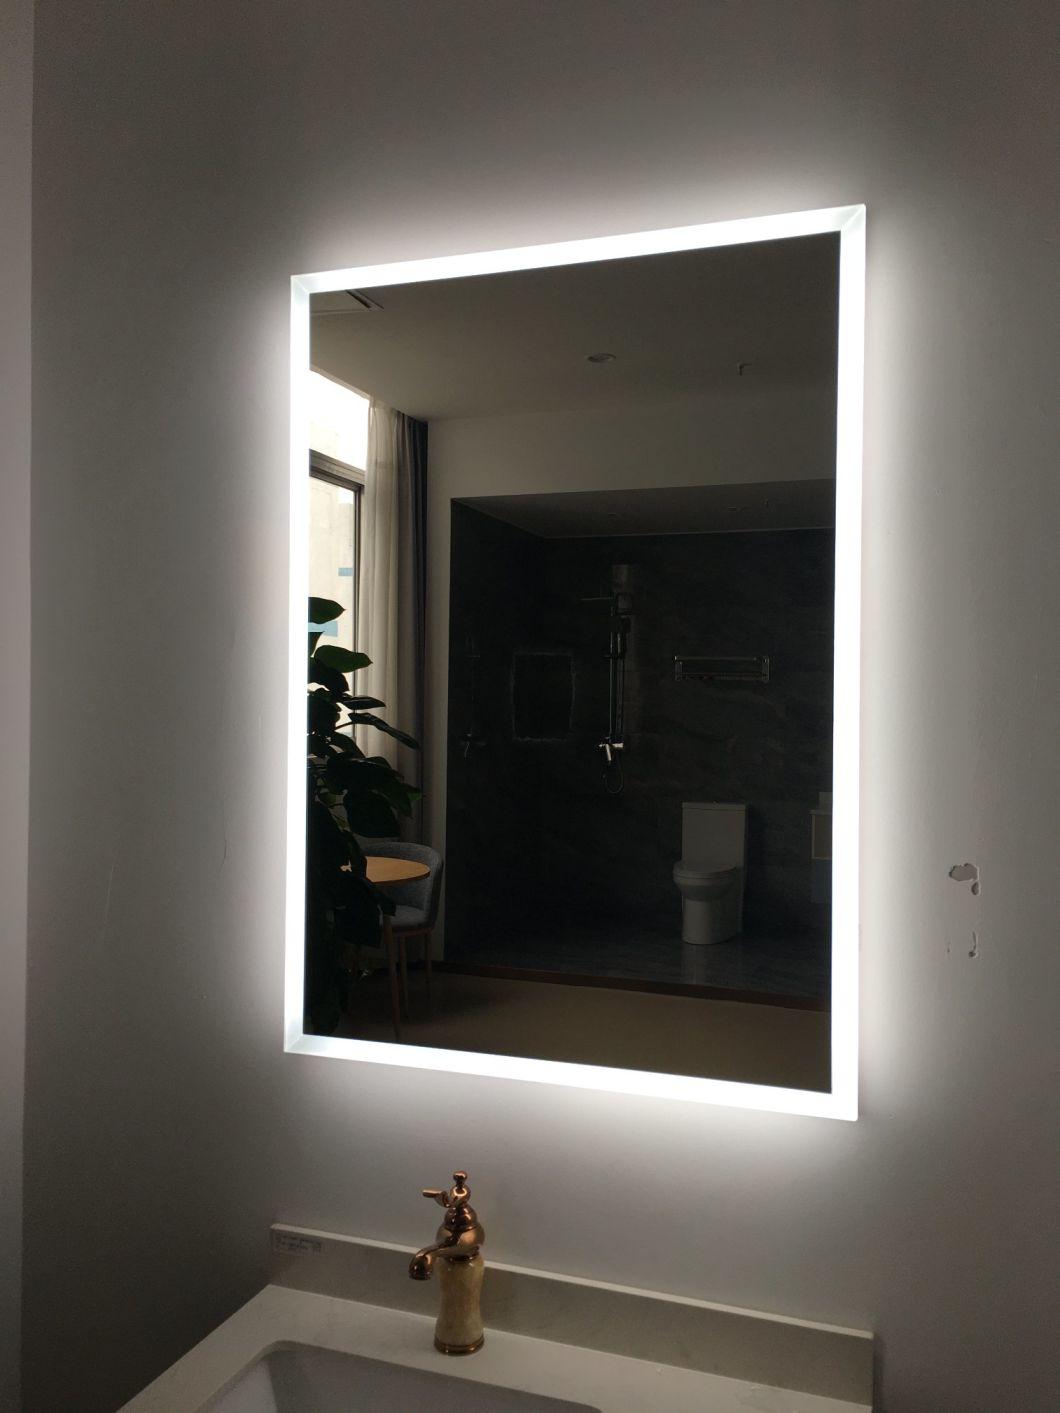 Acrylic Diffuser Soft Light Smart Glass Vanity Furniture LED Bathroom Wall Lighted Mirror with Hanging Bracket